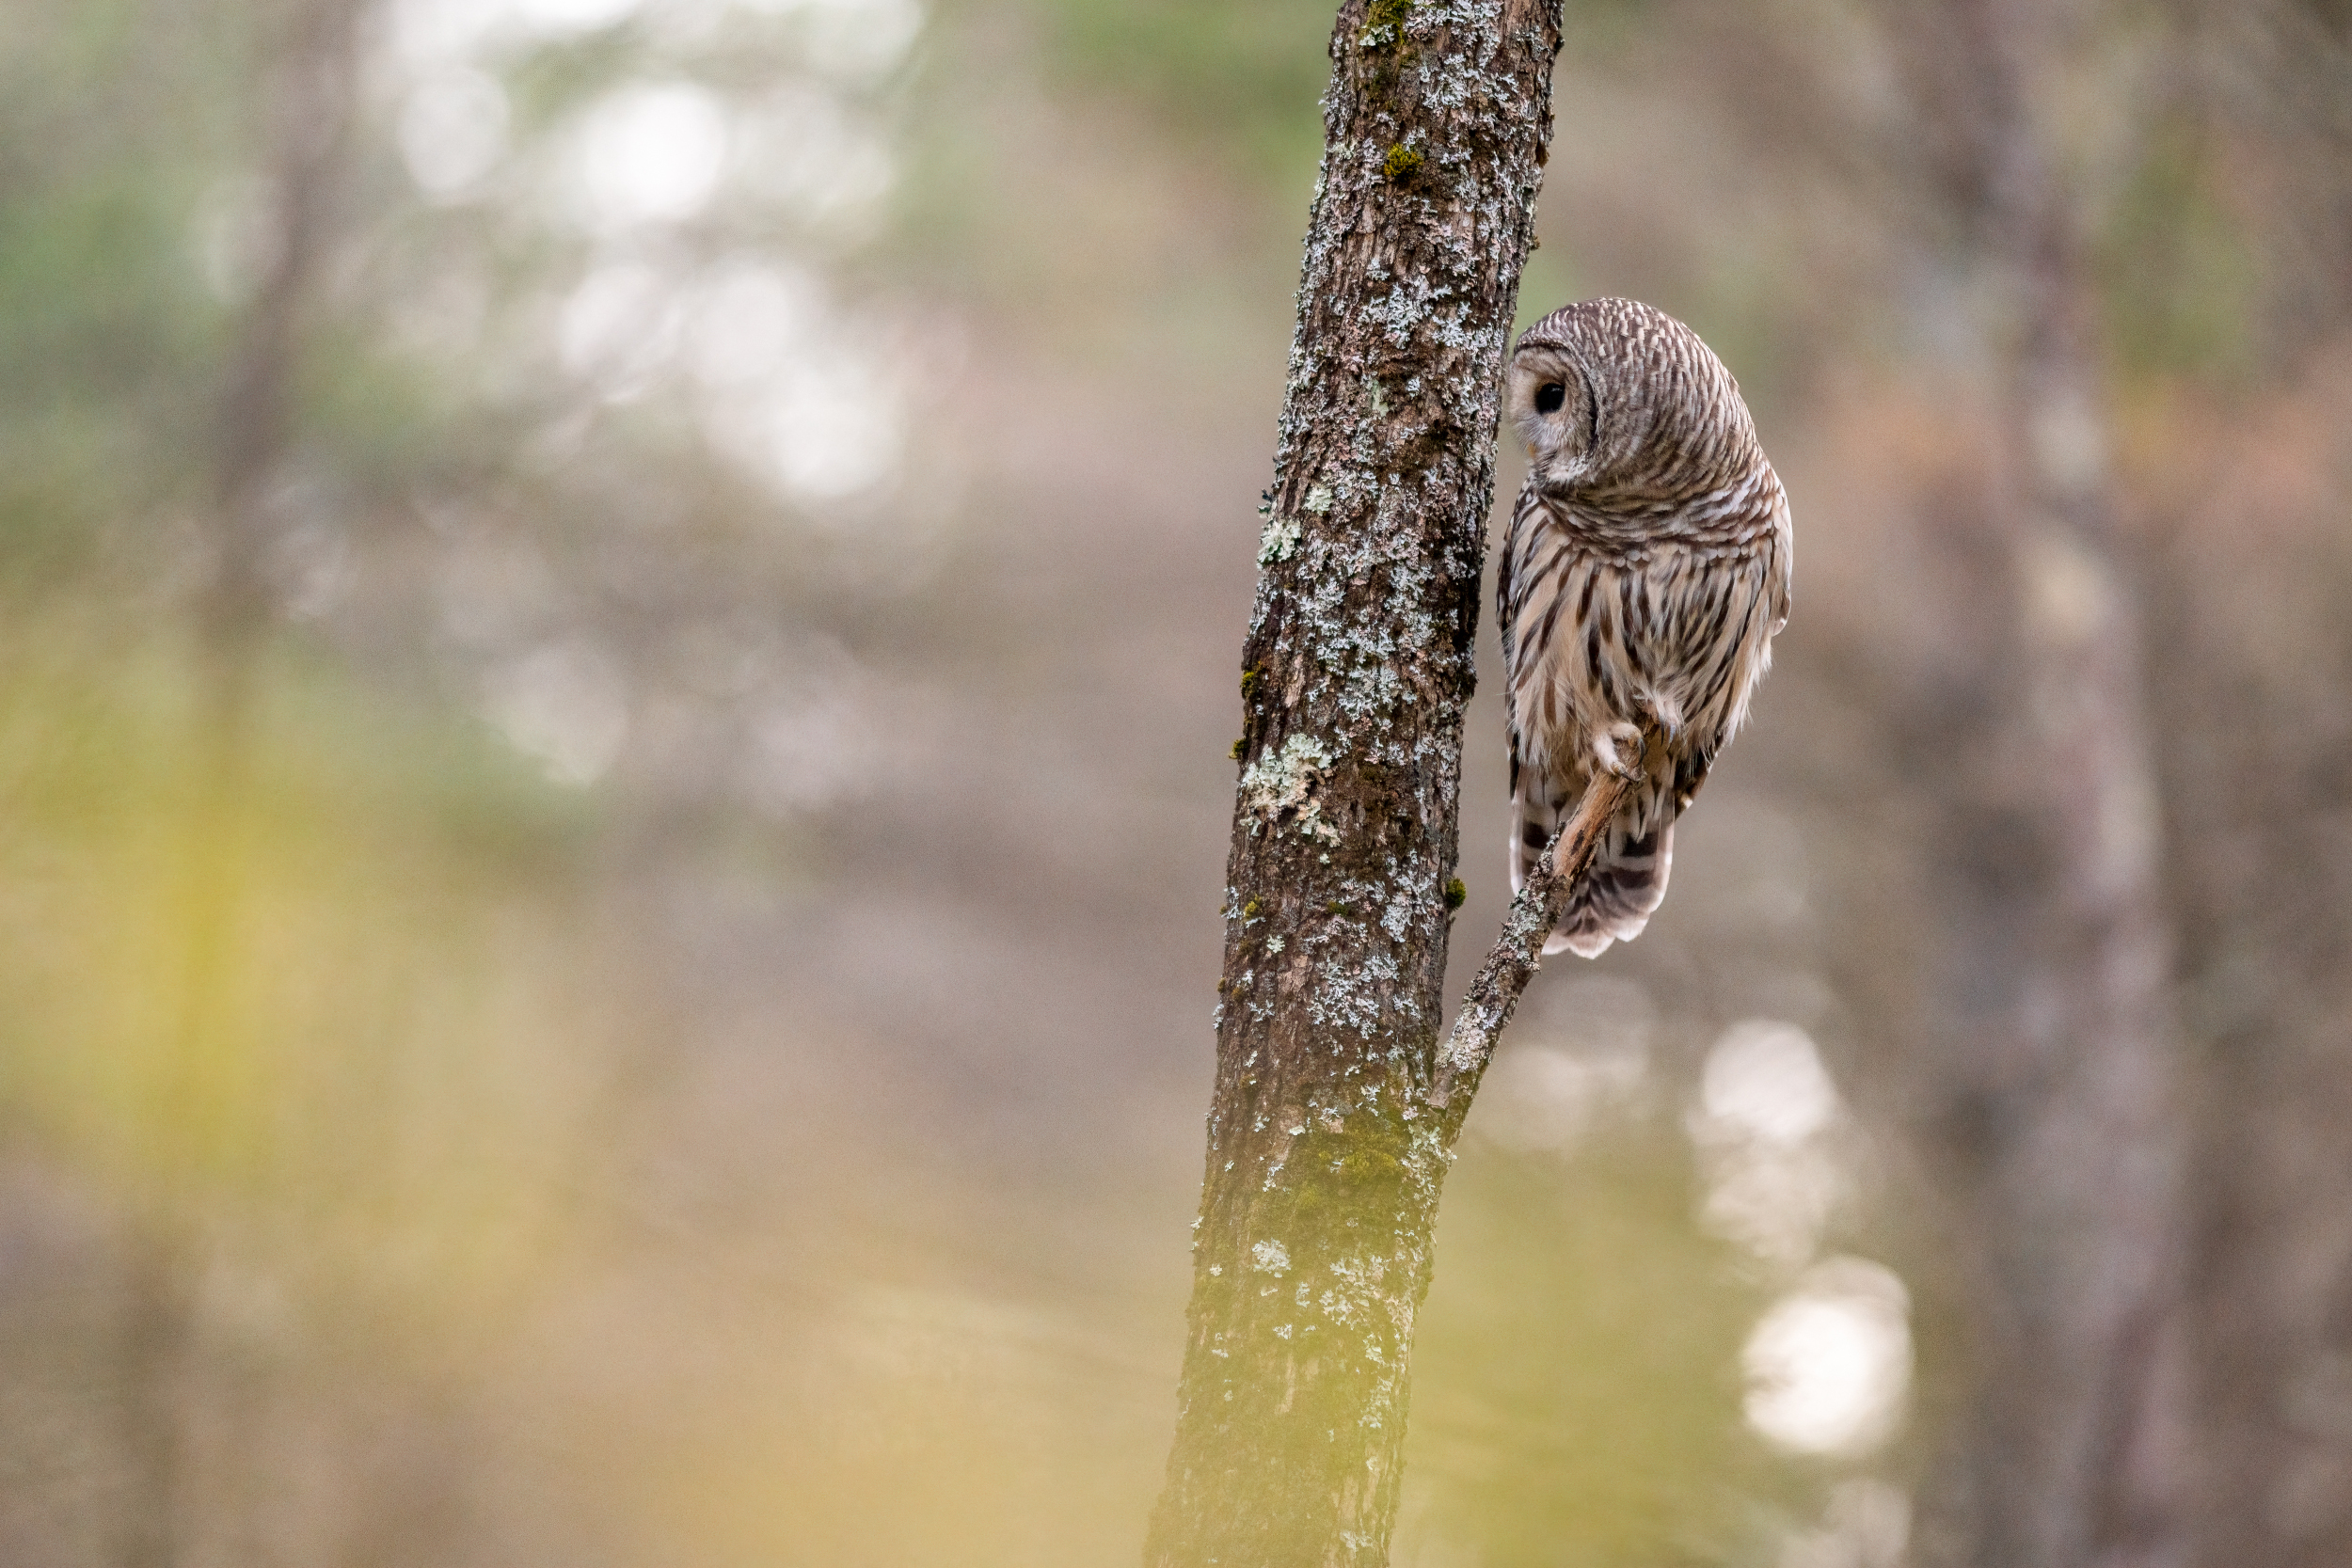 a photo of an adult Barred Owl perched on a branch, the bird looking across the scene as it continues its hunt after flying from another perch and failing to catch anything on the way over towards us.